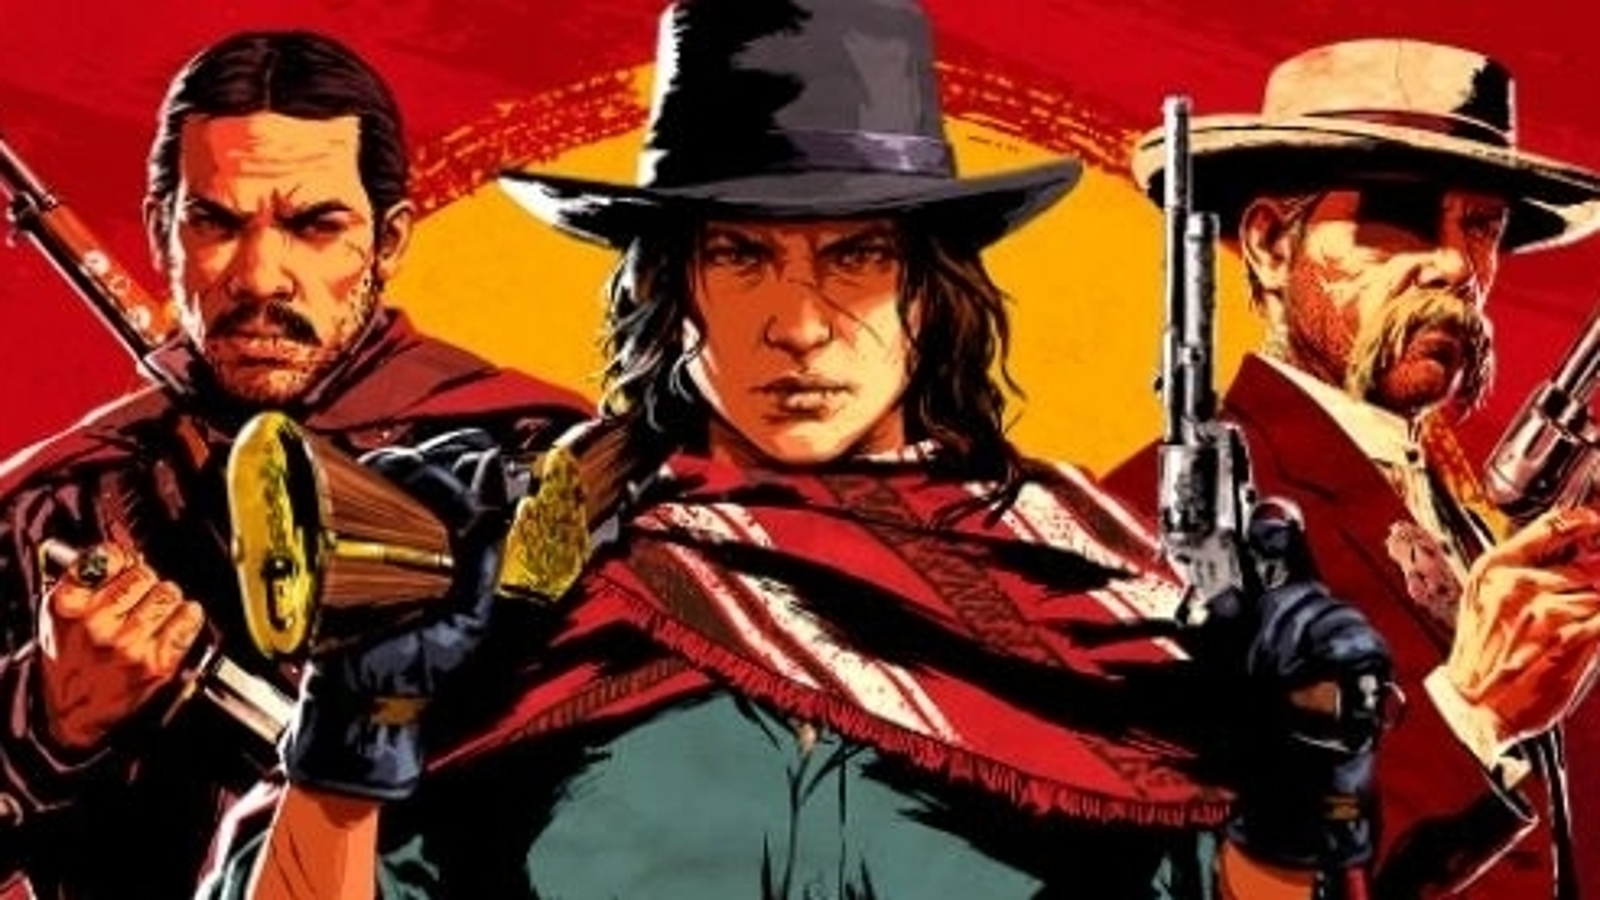 7 things we want in Red Dead Online